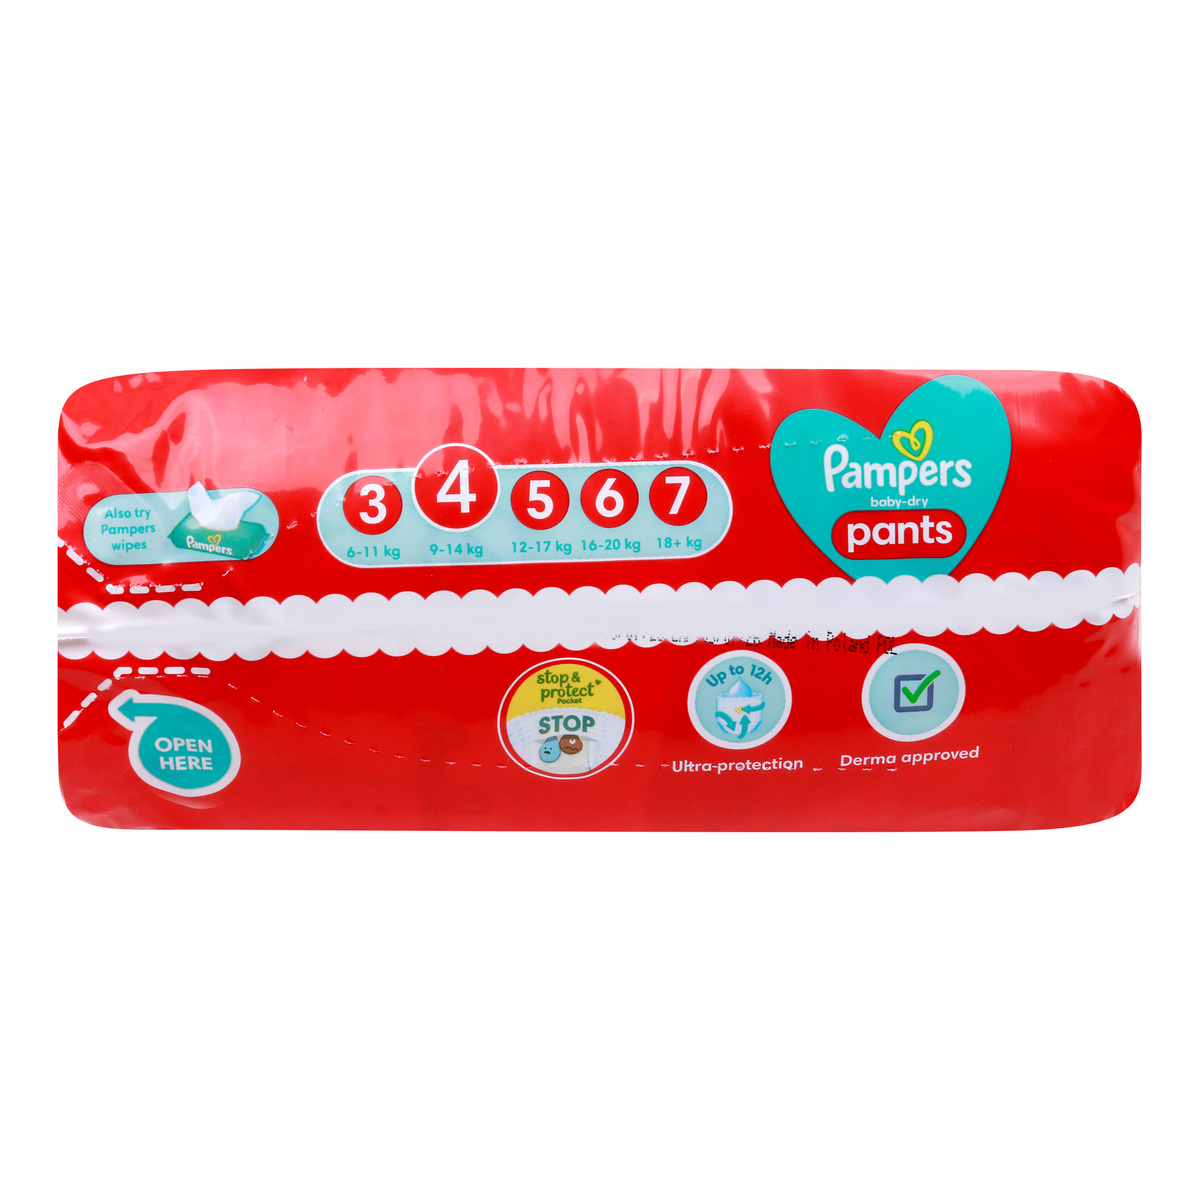 Pampers Baby-Dry Nappy Pants Diaper Size 4 9-15 kg 41 pcs